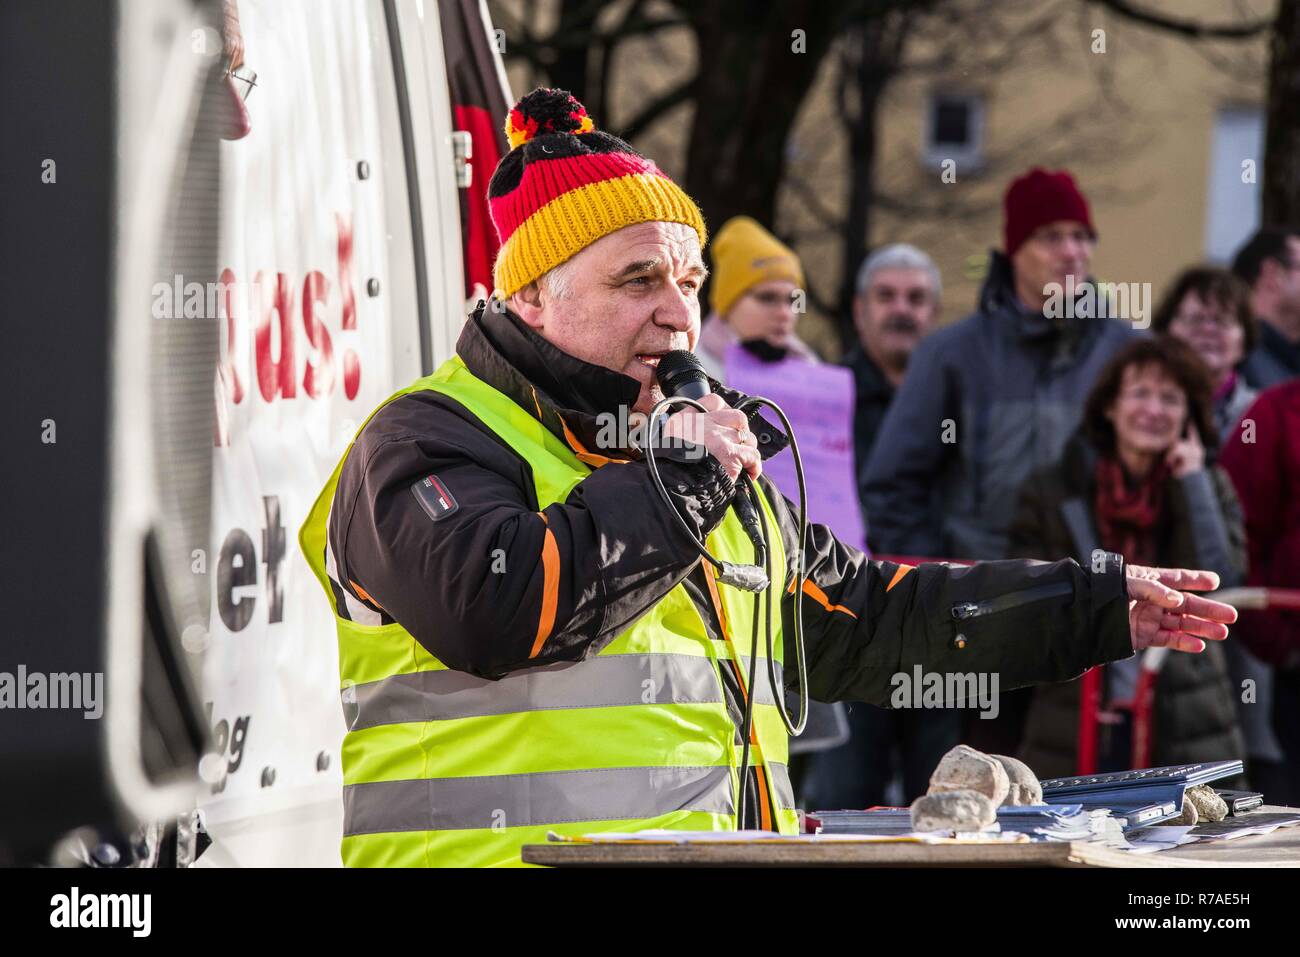 Munich, Bavaria, Germany. 8th December, 2018. Pegida Dresden in Munich, the self-proclaimed original Pegida, organized a rally in the city's Milberthofen district in front of the Dankeskirche (Thanks Church) of Munich. Headed by Michael Stuerzenberger, the group rallied against the United Nations Migration Pact. Speaking with Stuerzenberger was Gernot Tegetmeyer from the Nuremburg Pegida circles, who are likewi Credit Credit: ZUMA Press, Inc./Alamy Live News Stock Photo